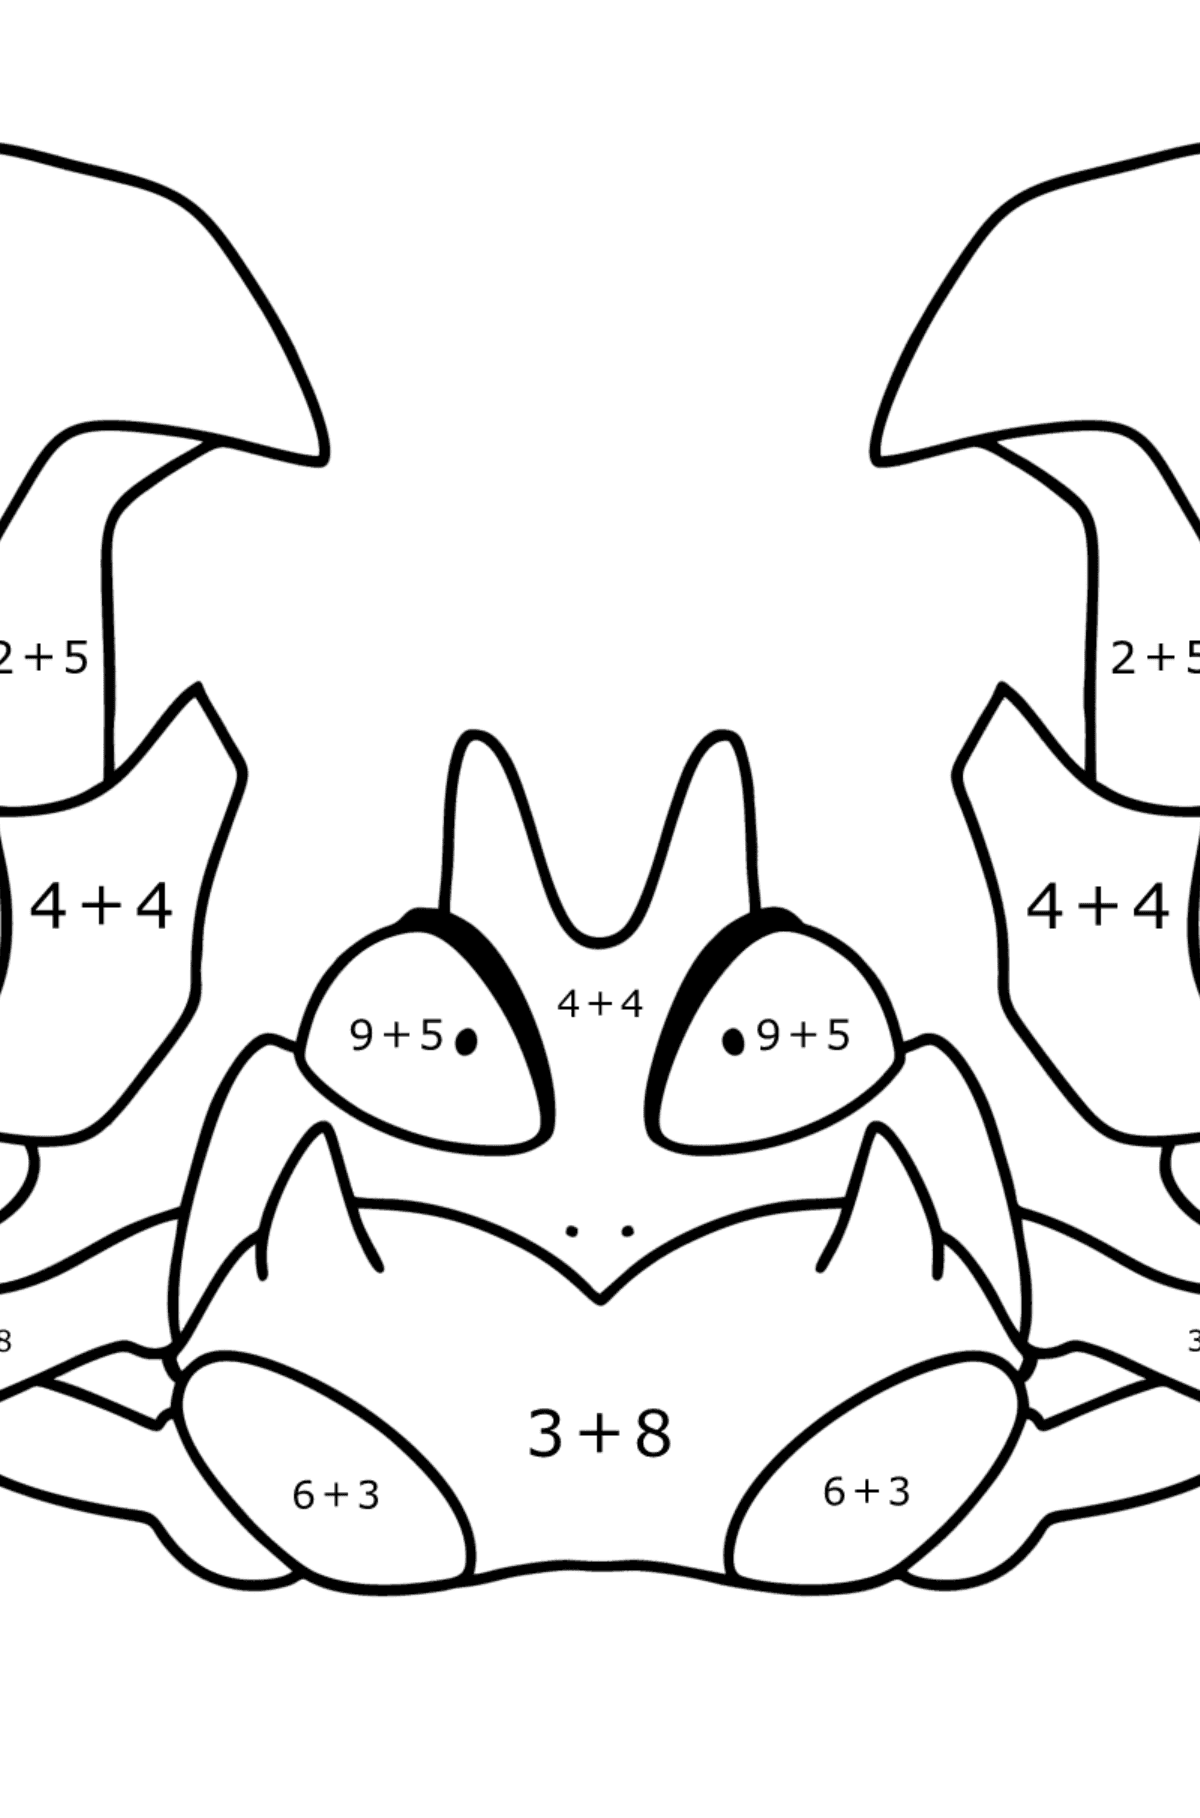 Pokemon Go Krabby coloring page - Math Coloring - Addition for Kids